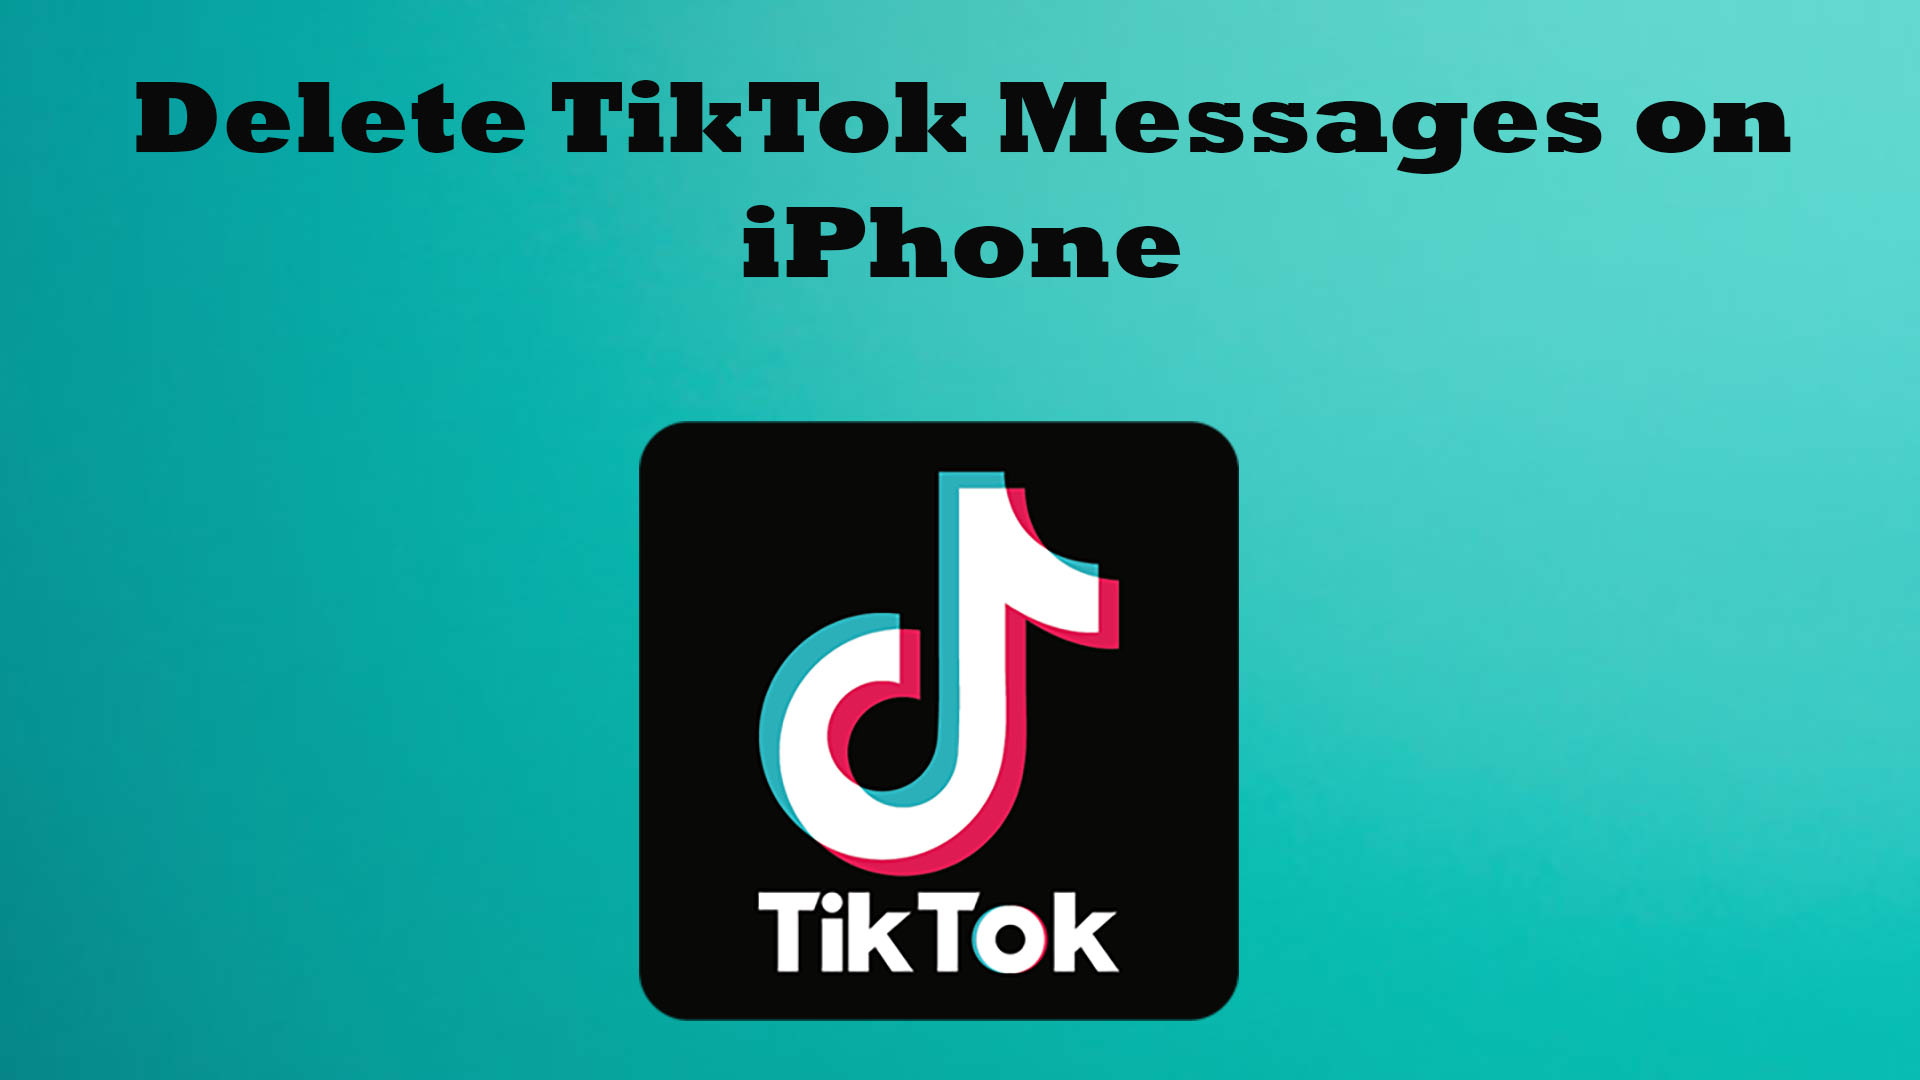 How to Delete TikTok Messages on iPhone